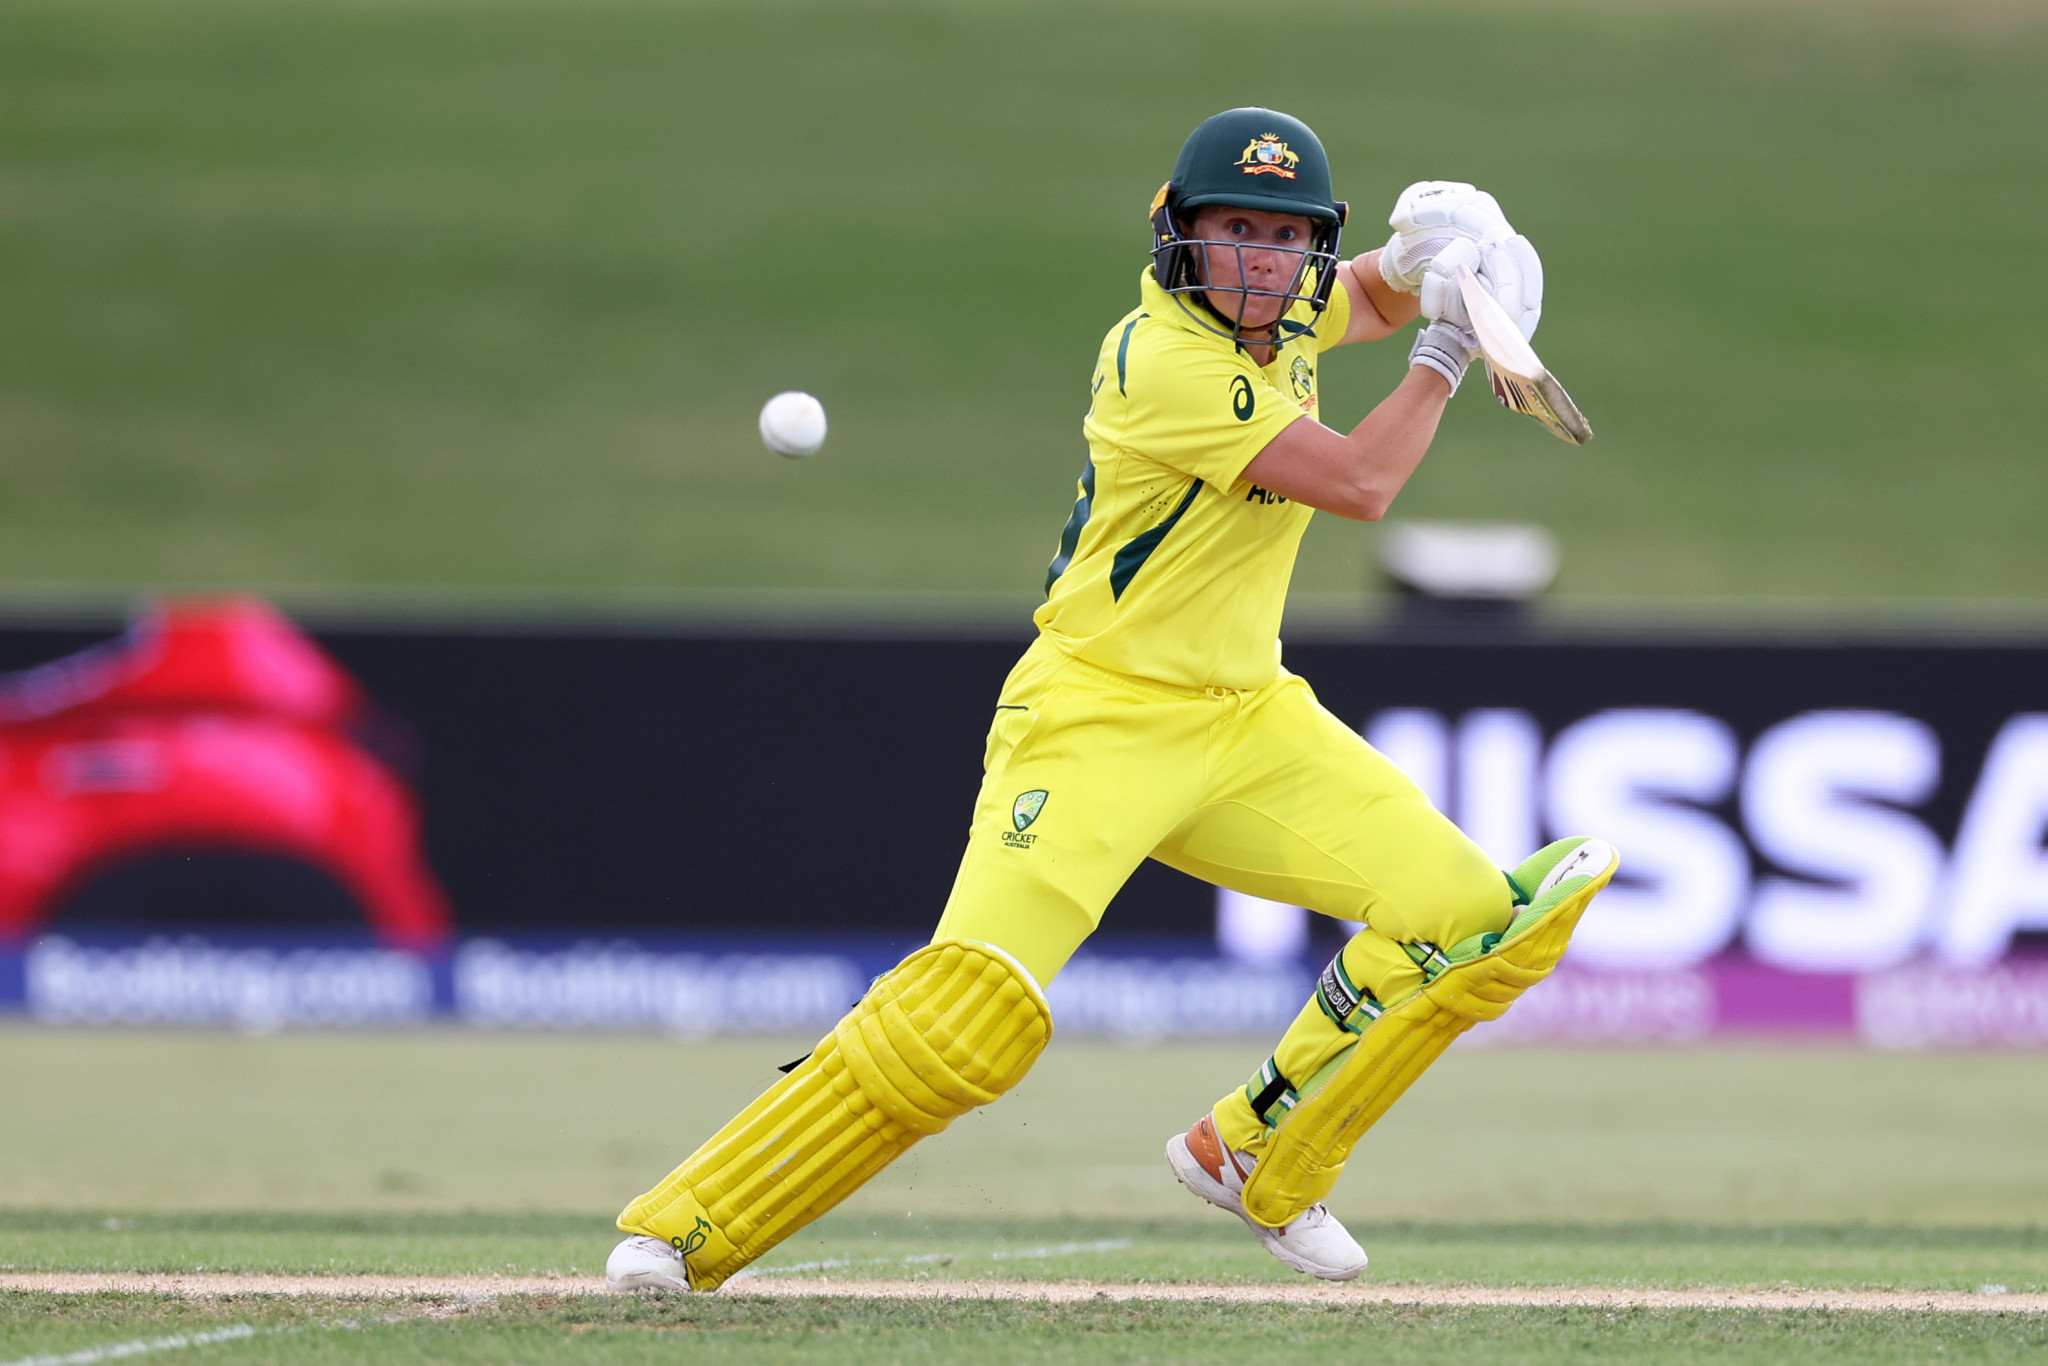 Australia continue impressive form at Women’s Cricket World Cup with big win against West Indies 